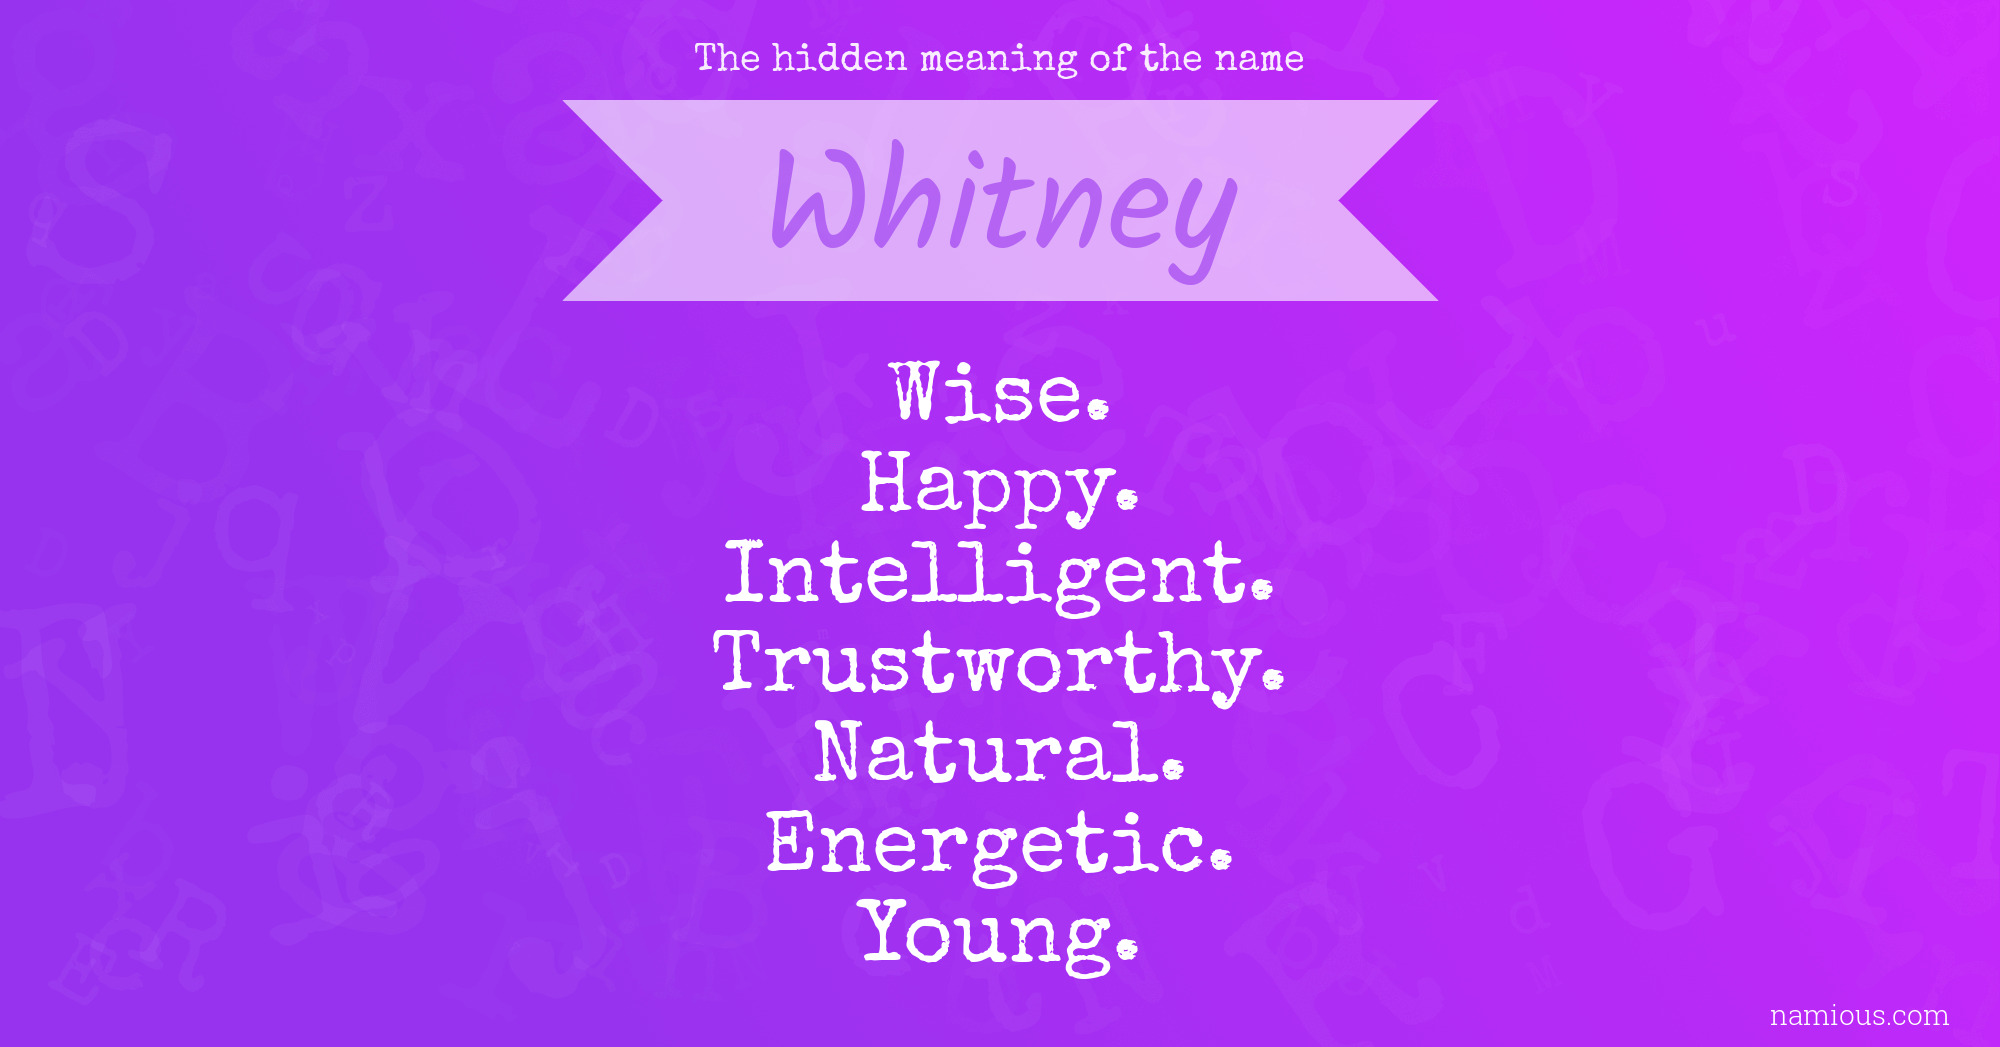 The hidden meaning of the name Whitney